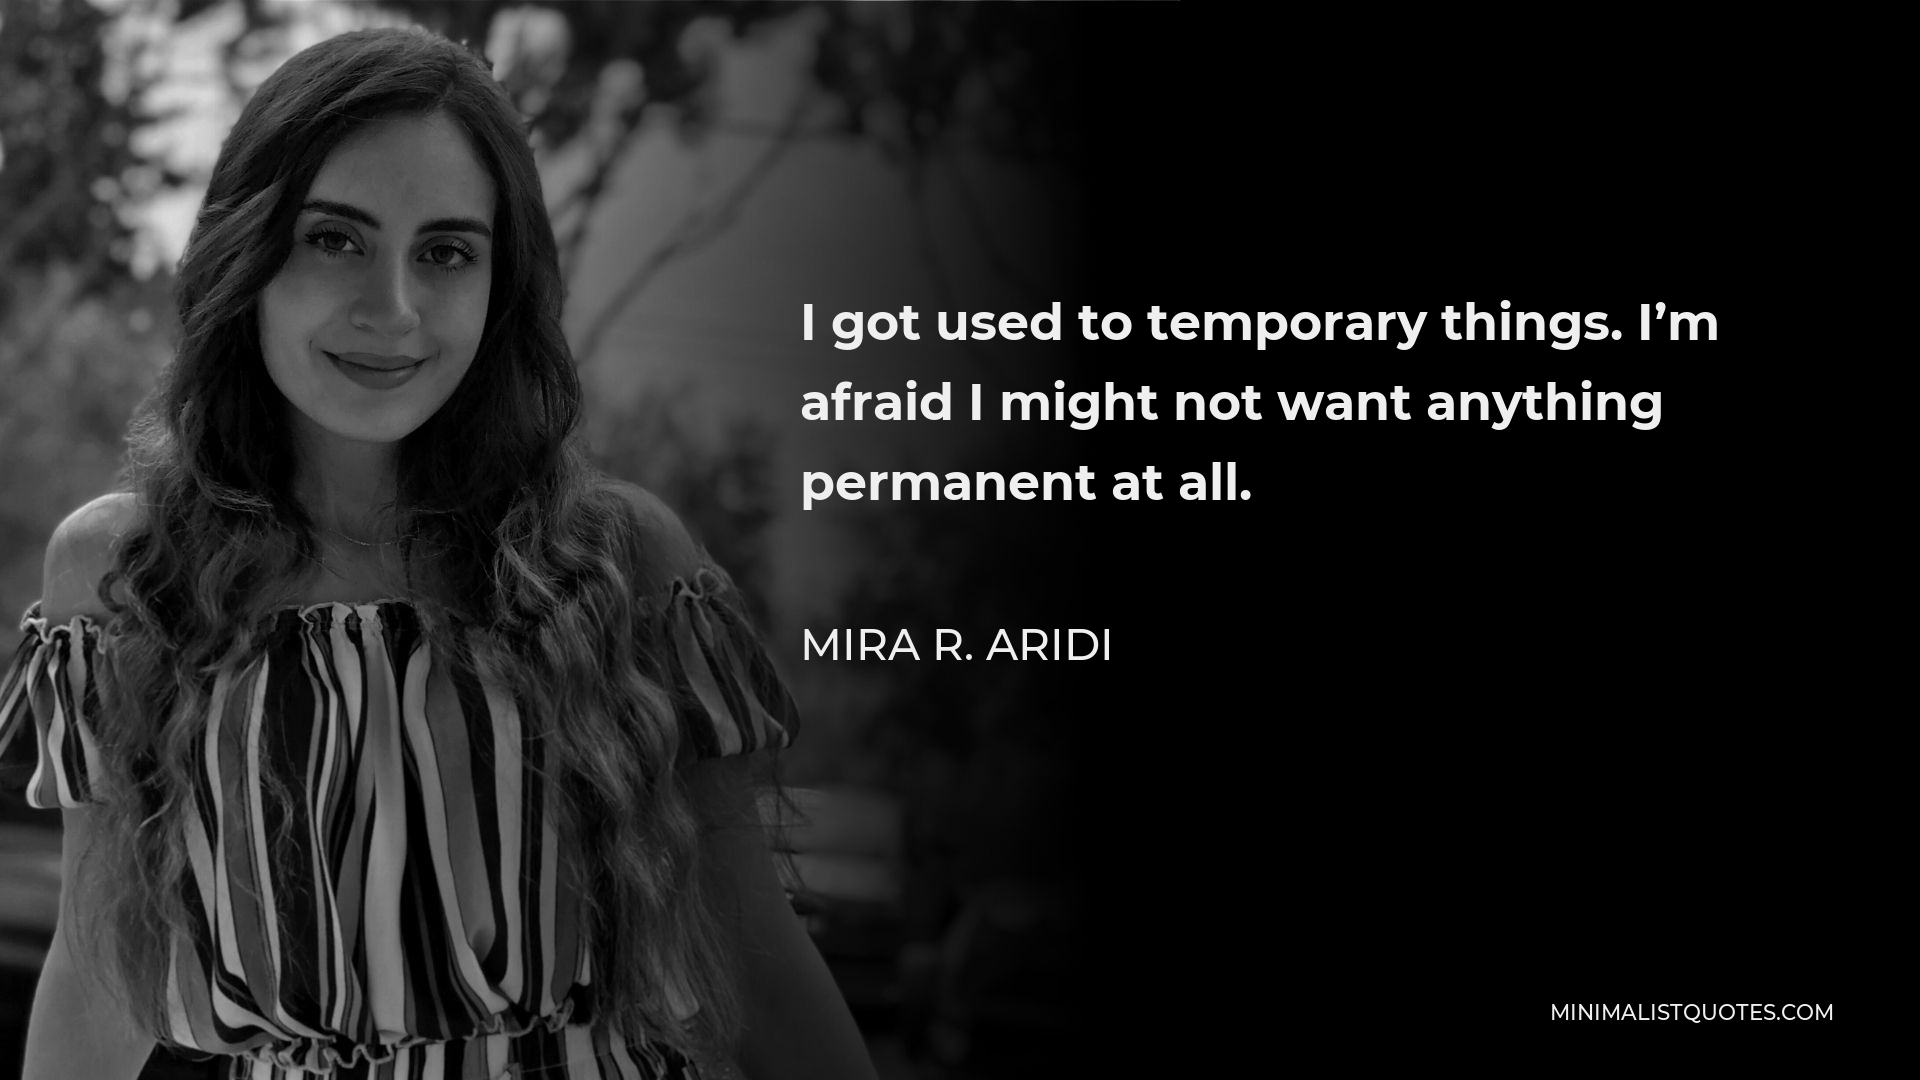 Mira R. Aridi Quote - I got used to temporary things. I’m afraid I might not want anything permanent at all.